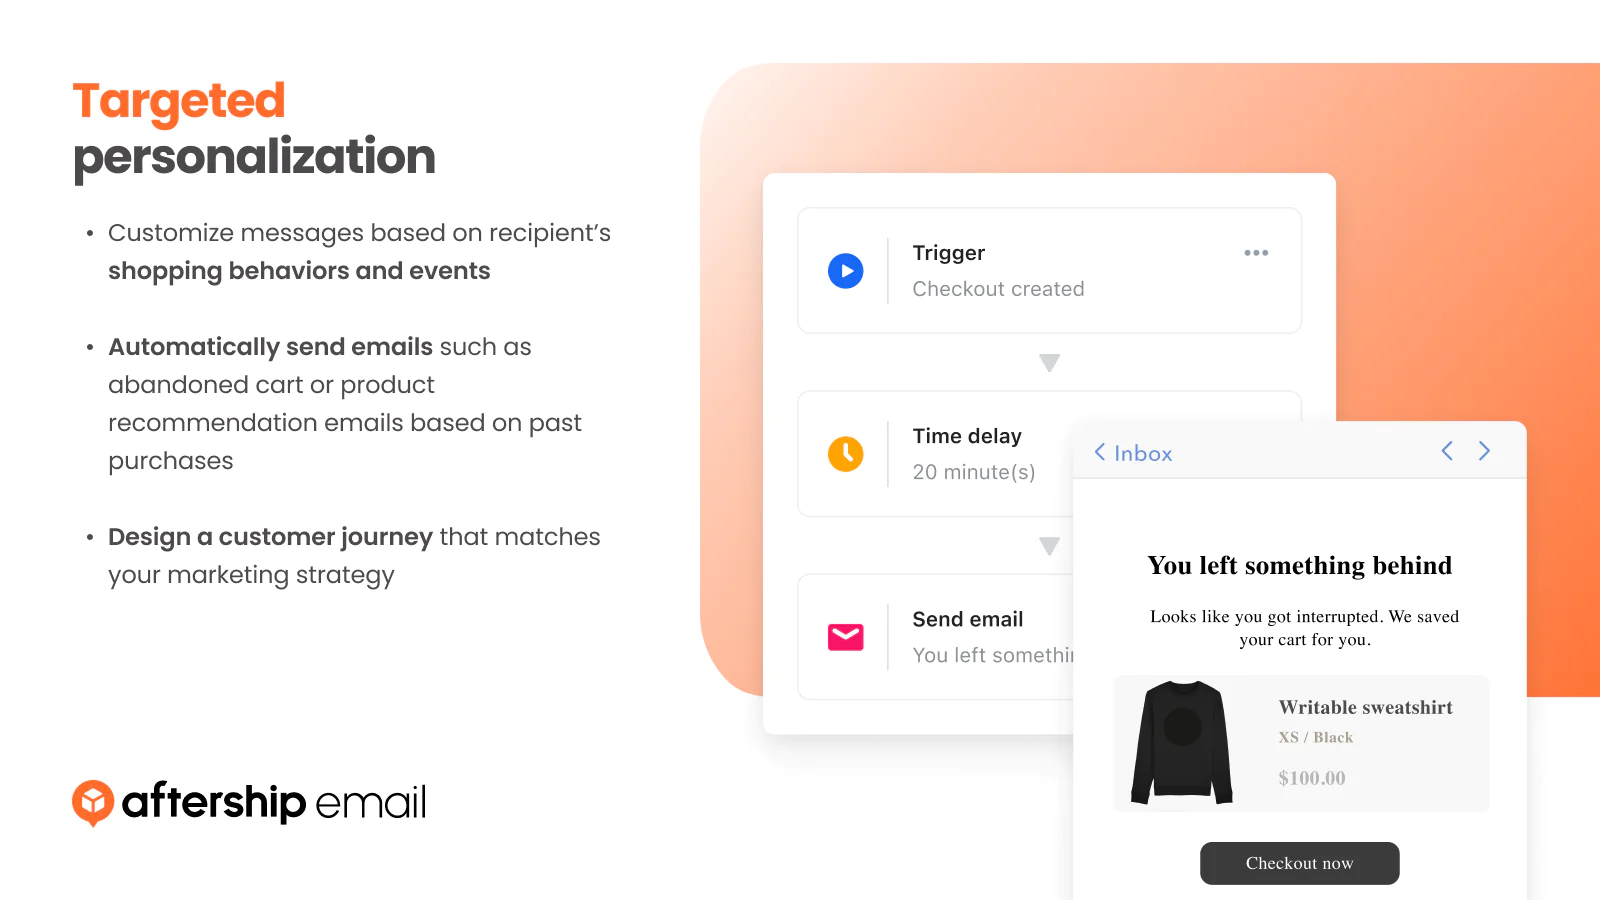 automizely-email-marketing-sms-targeted-personalization